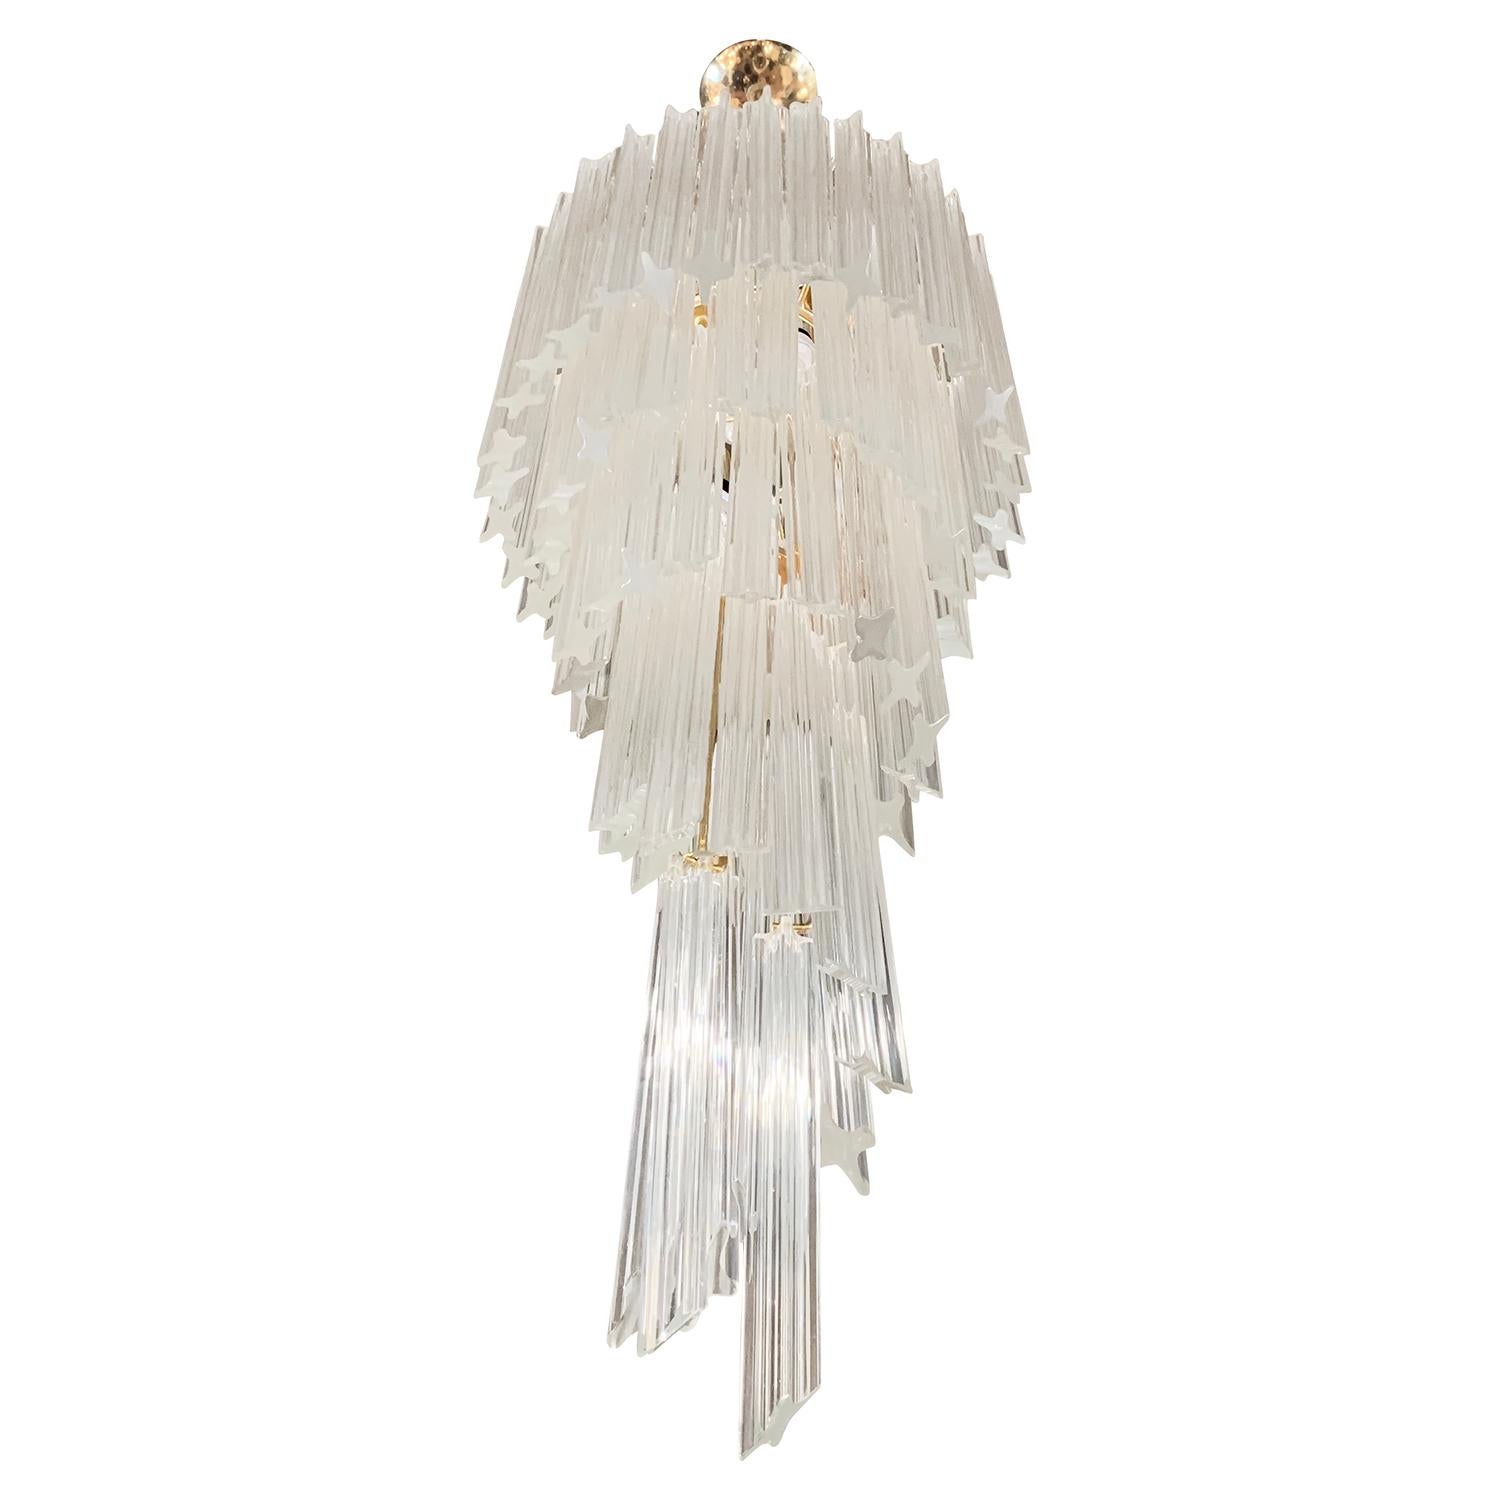 Hand-Crafted 20th Century Italian Five-Tiered Spiral Murano Glass Chandelier by Paolo Venini